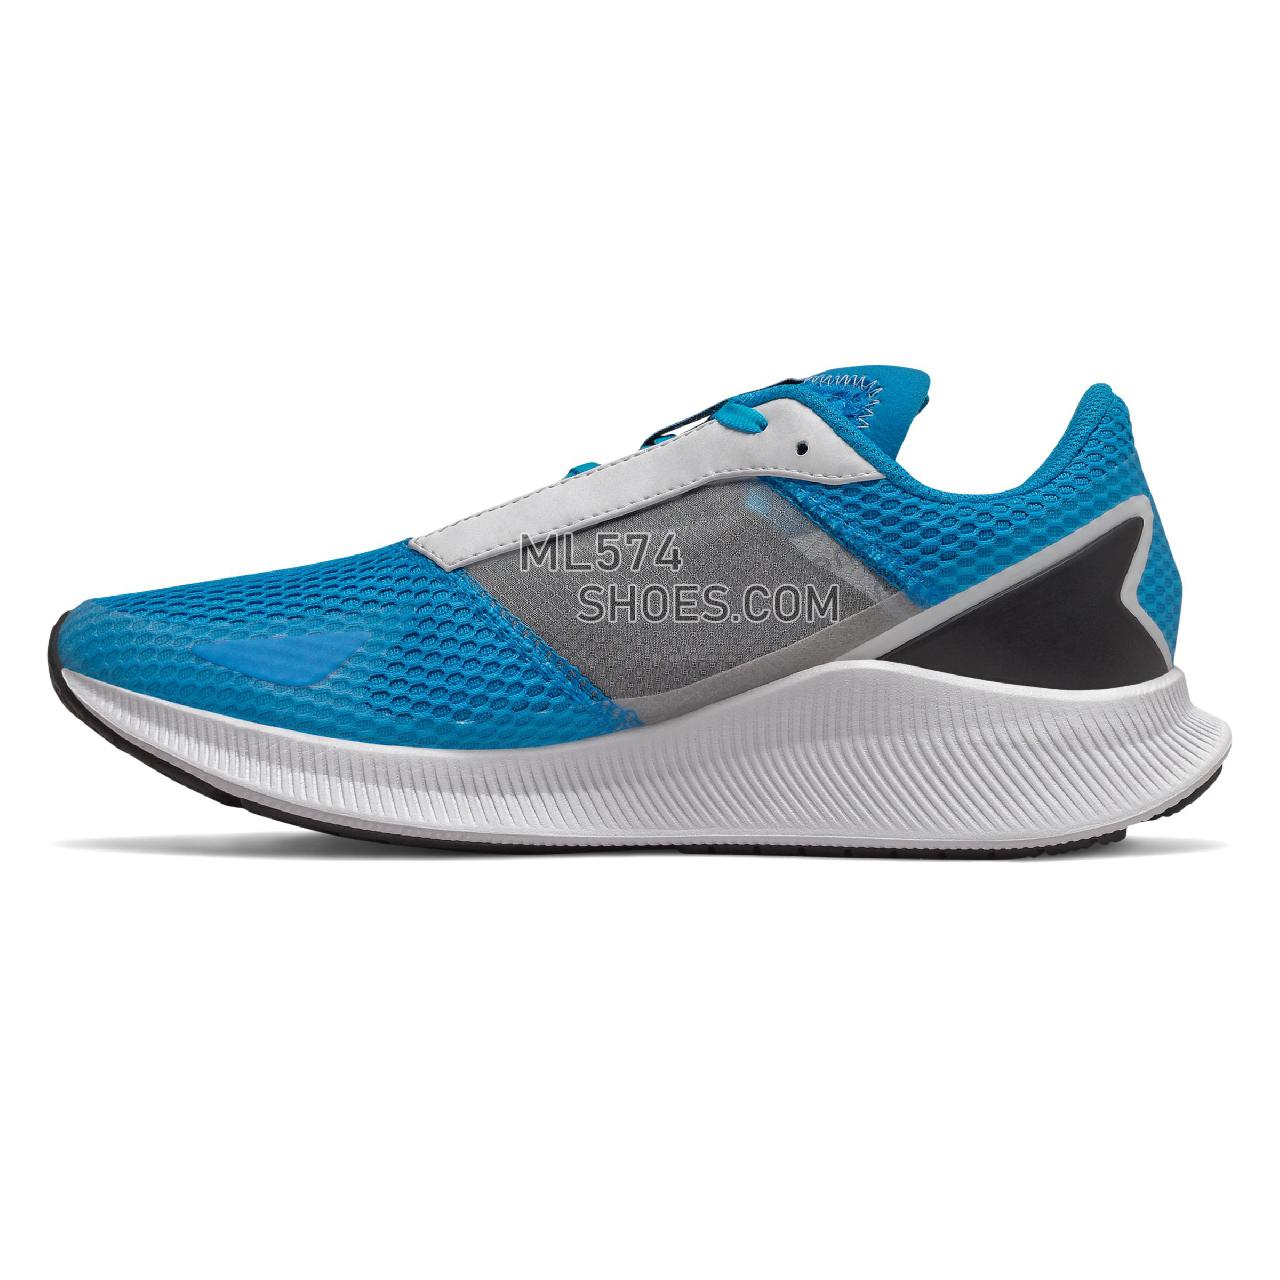 New Balance FuelCell Flite - Men's Neutral Running - Vision Blue with White and Black - MFCFLLV